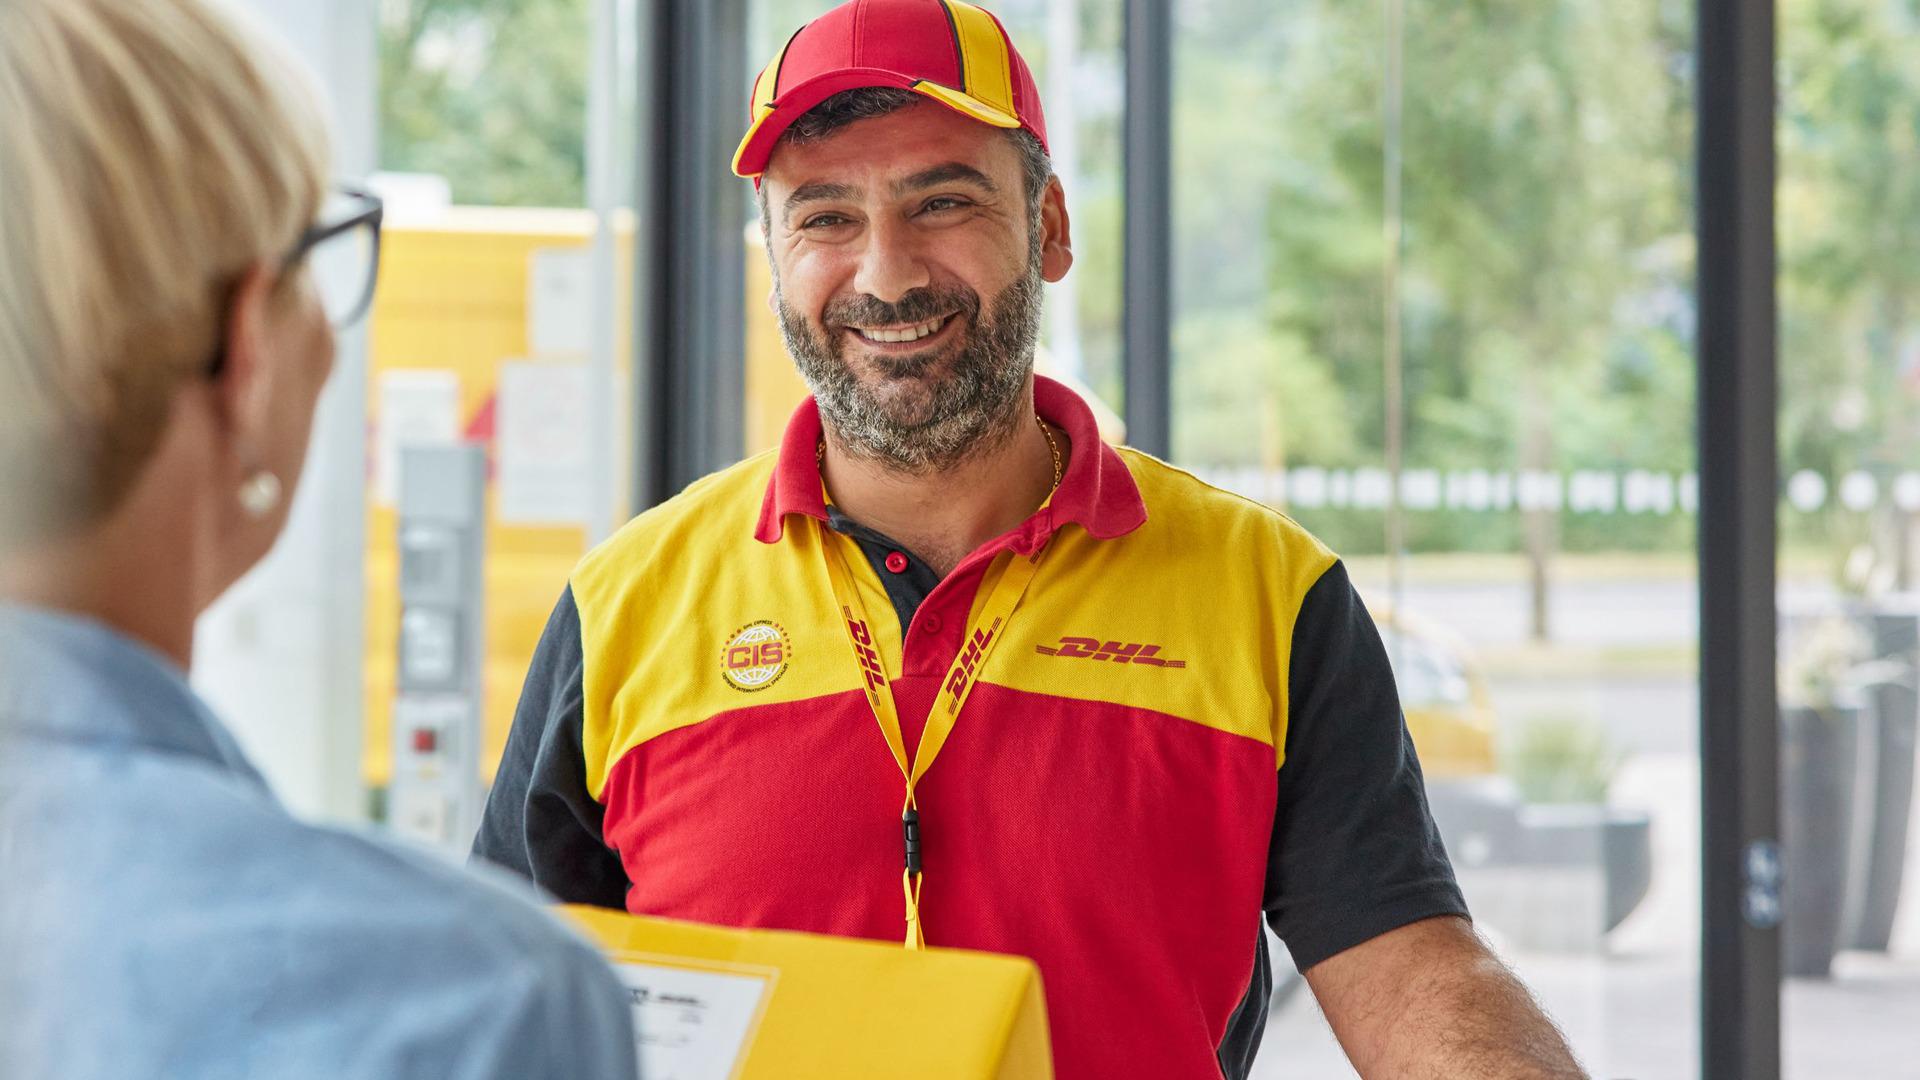 DHL Express Service Point (City Phones)